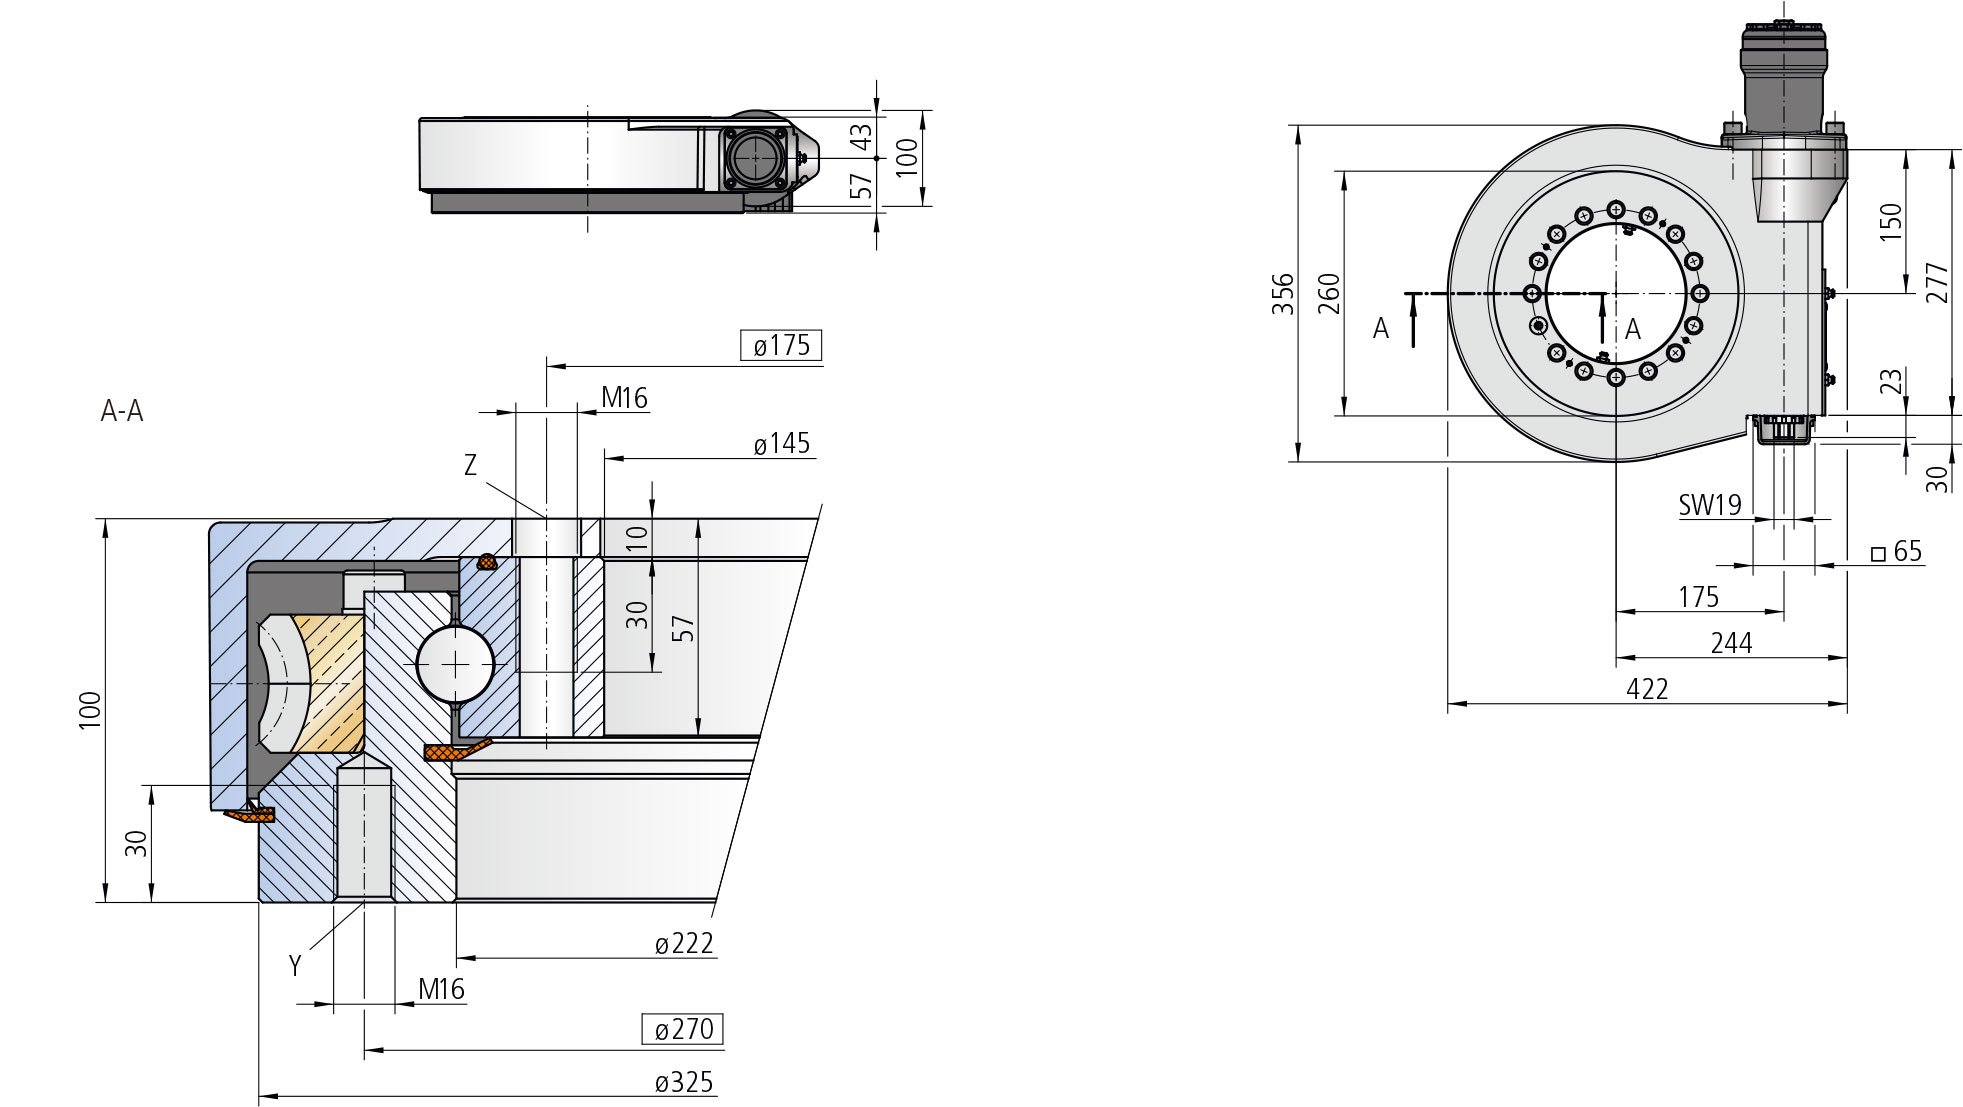 WD-LC 0223 / 1-row / 1 drive WD-L Series cad drawing